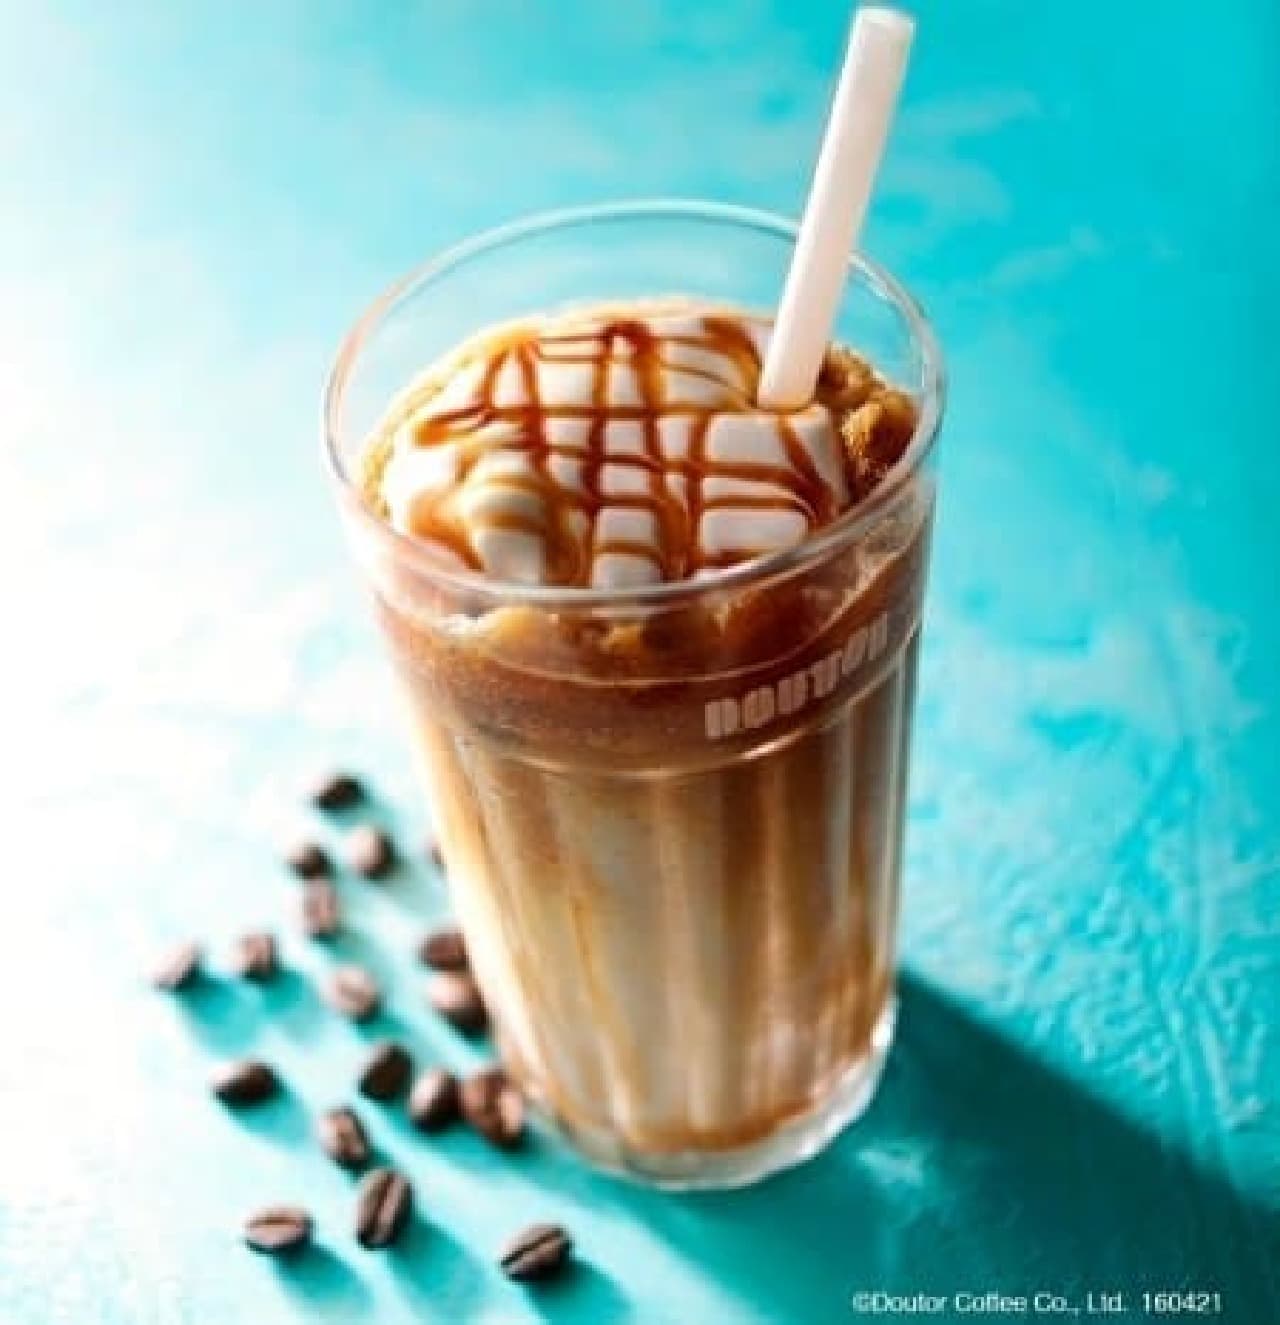 Available at Doutor limited stores! Frozen with latte flavor